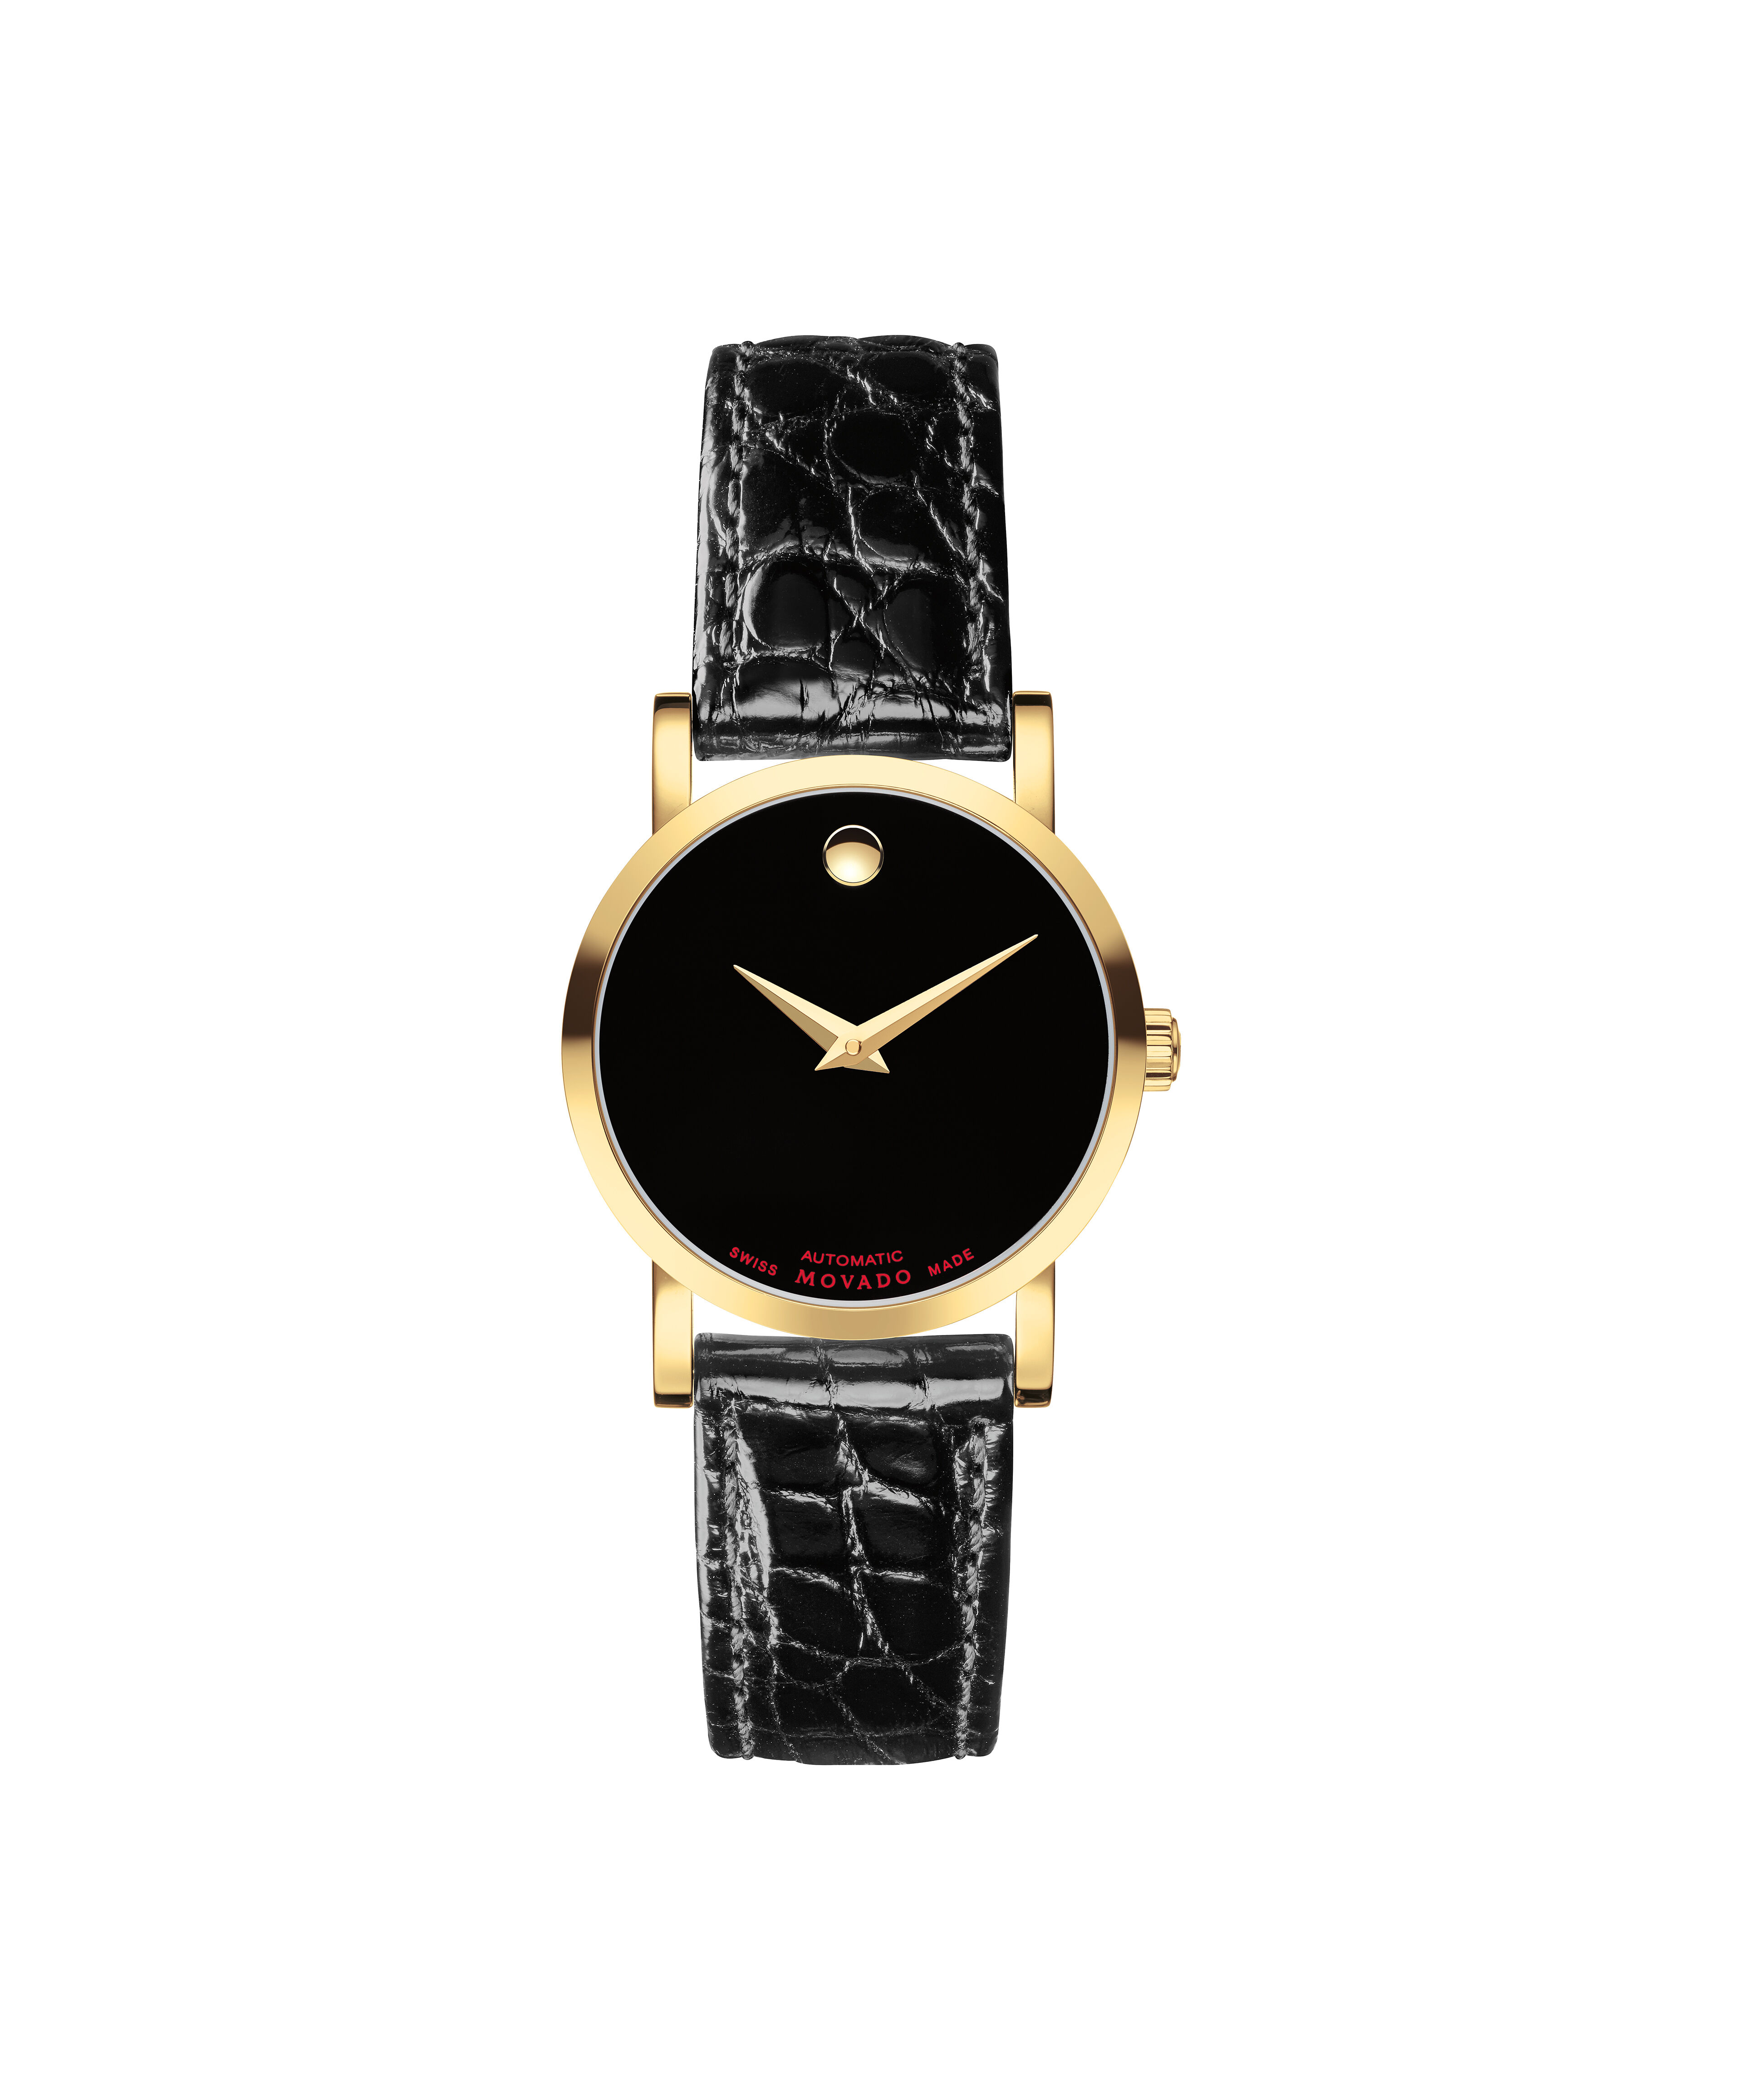 Movado Museum Ladies, MOP Dial - Yellow Gold Tone, Ref # 0606608